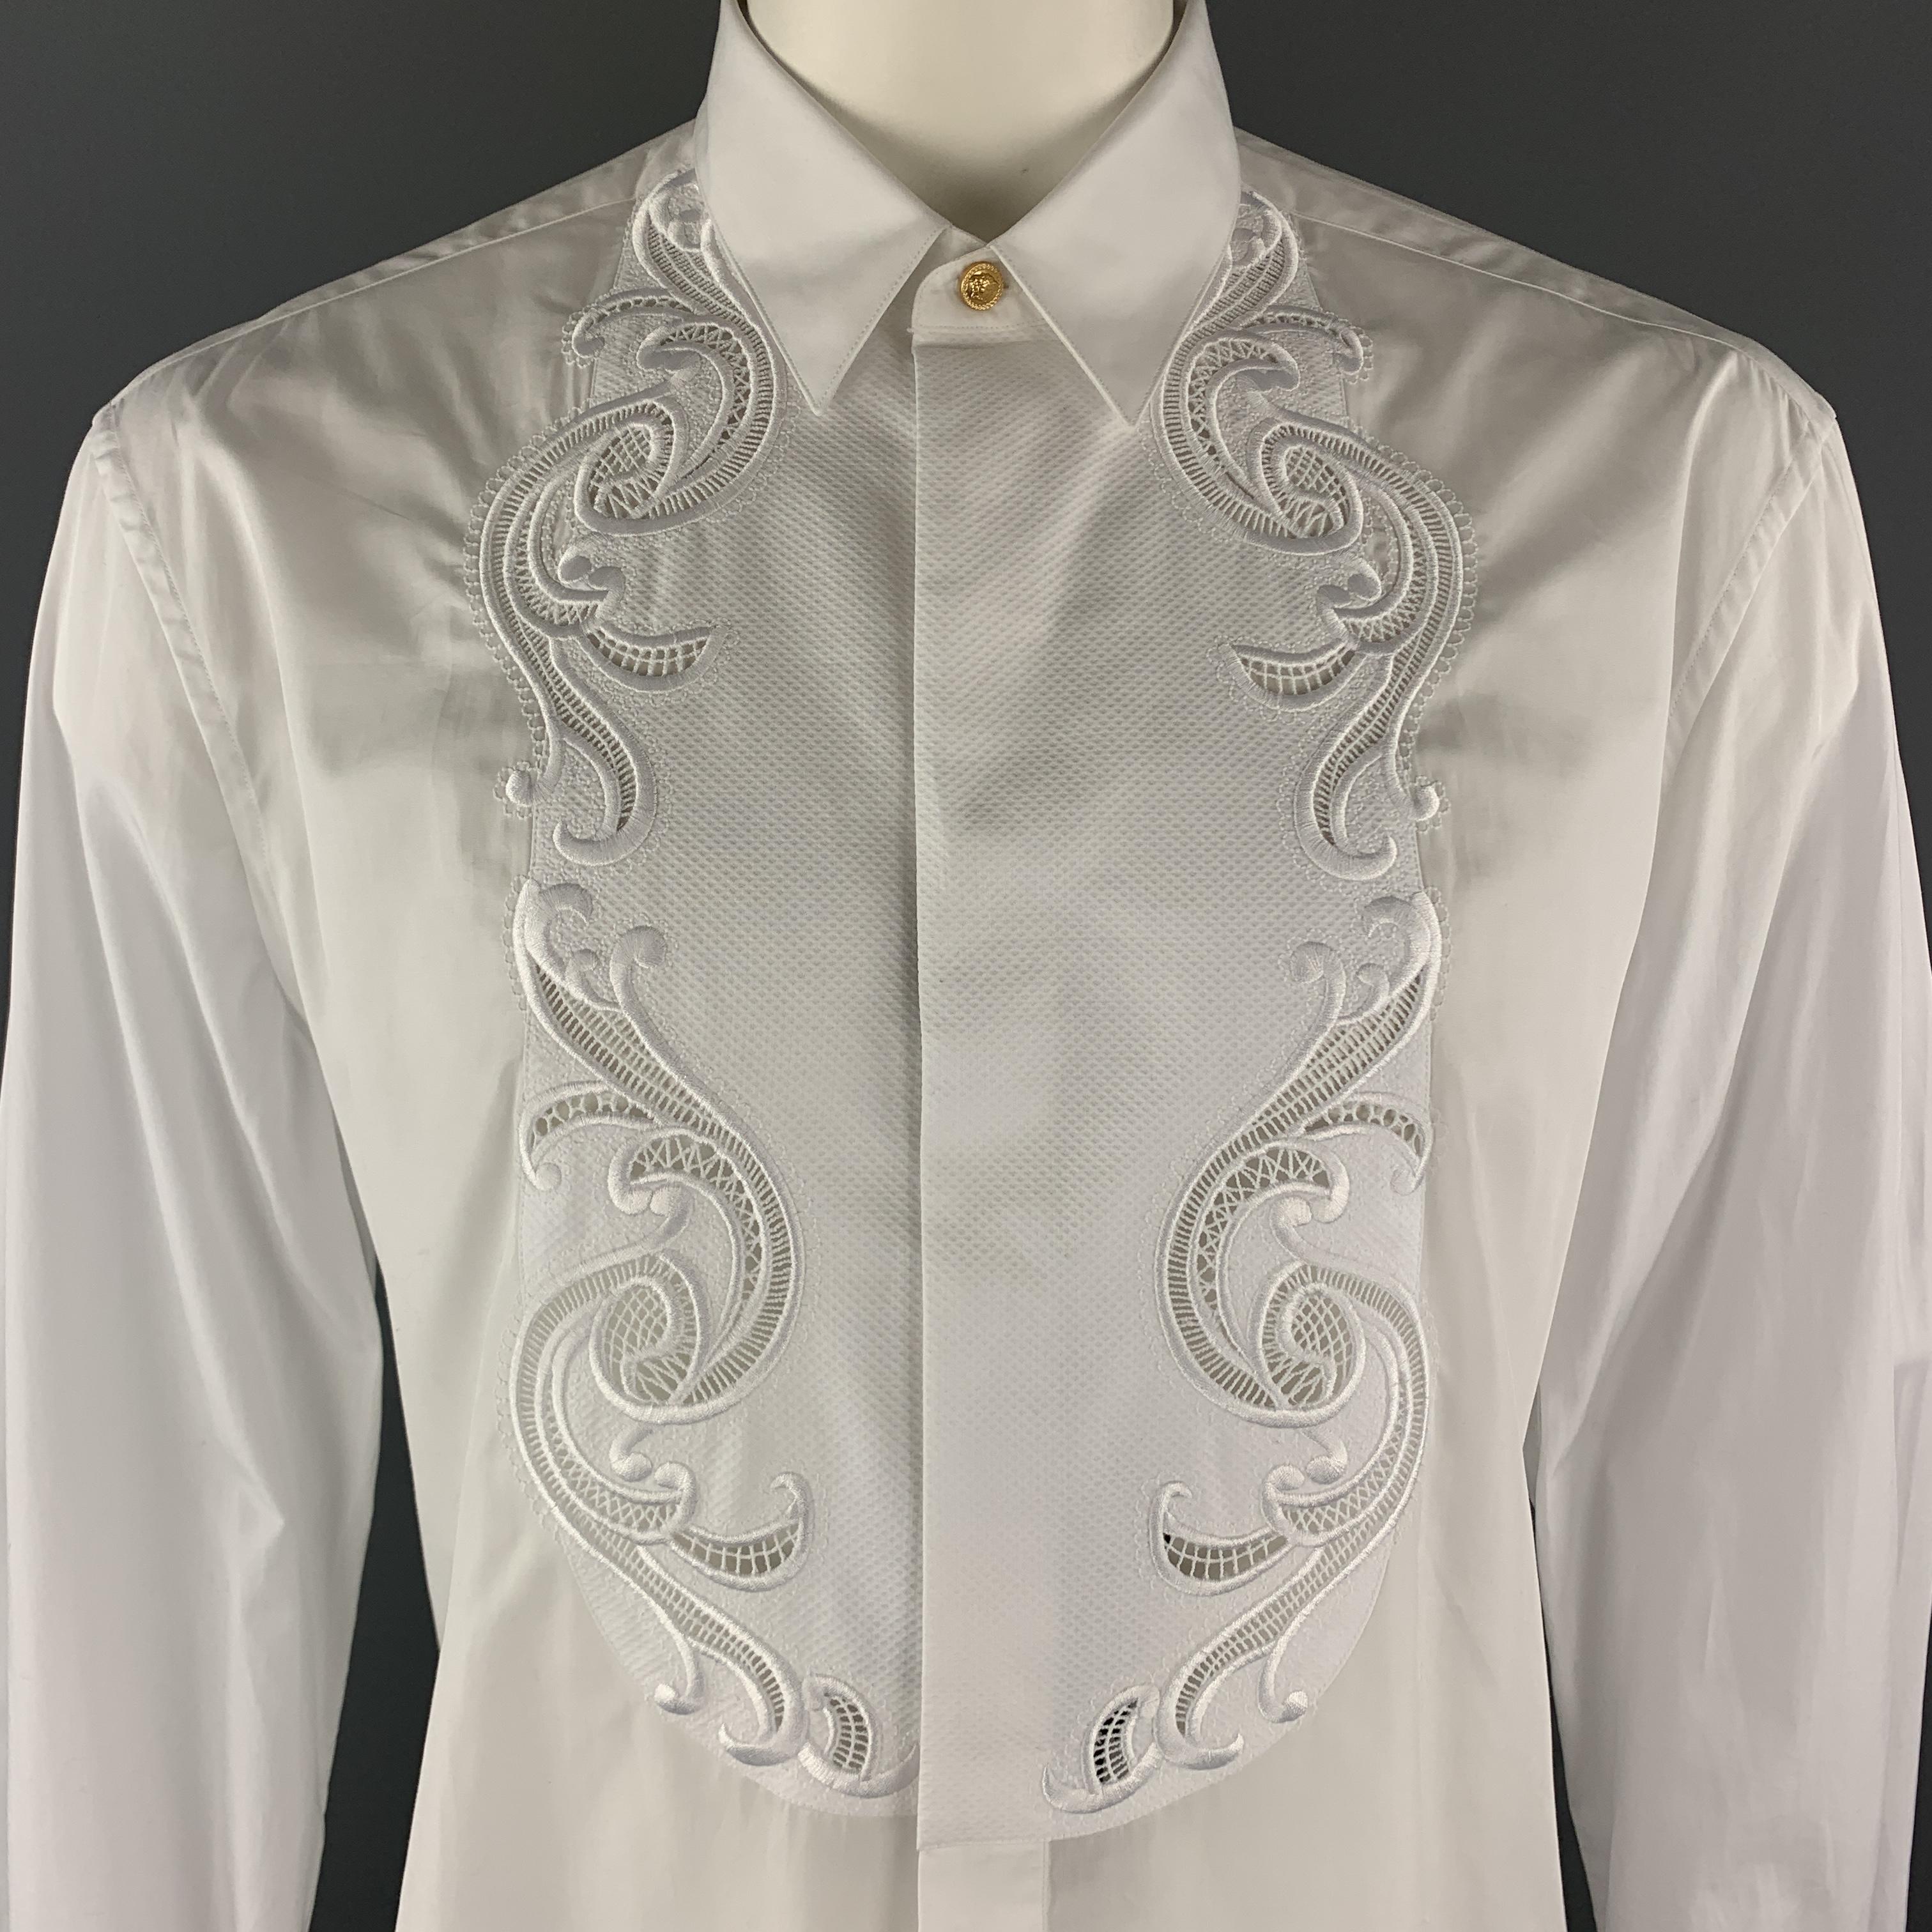 VERSACE dress shirt comes in white cotton poplin with a pointed gold tone Medusa button collar, hidden placket button front, link cuffs, and textured bib with Baroque lace cutout trim. Made in Italy.

Brand New.
Marked: US